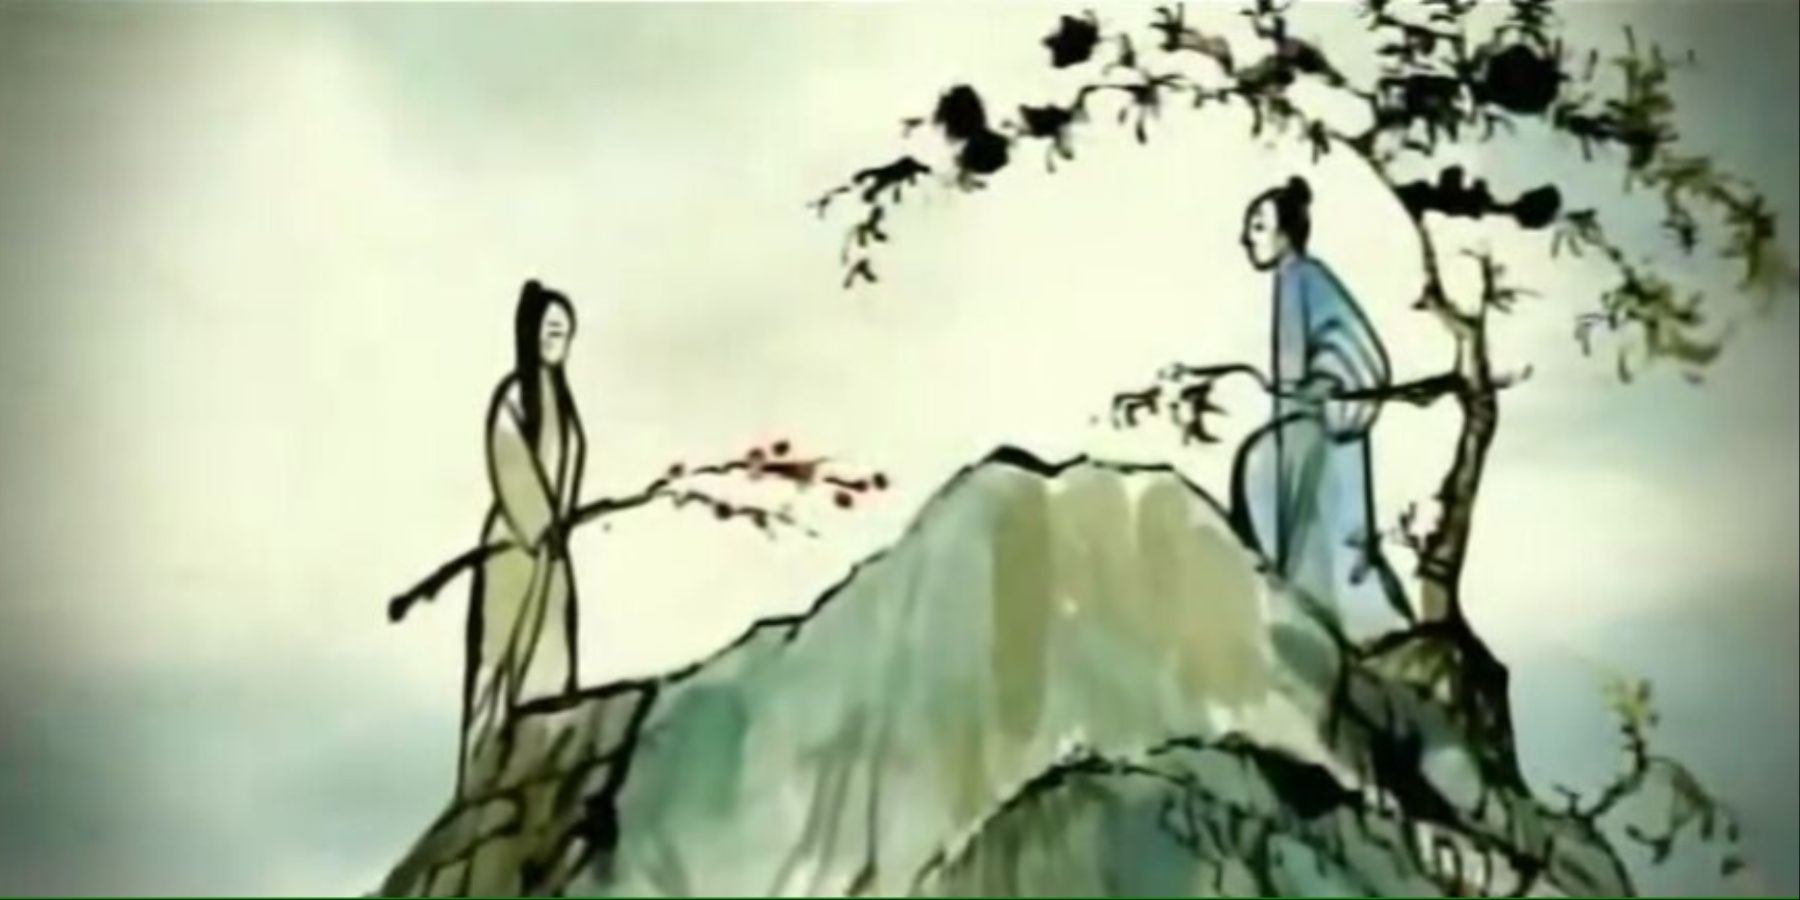 Oma & Shu, The First Earthbenders in the Avatar Franchise